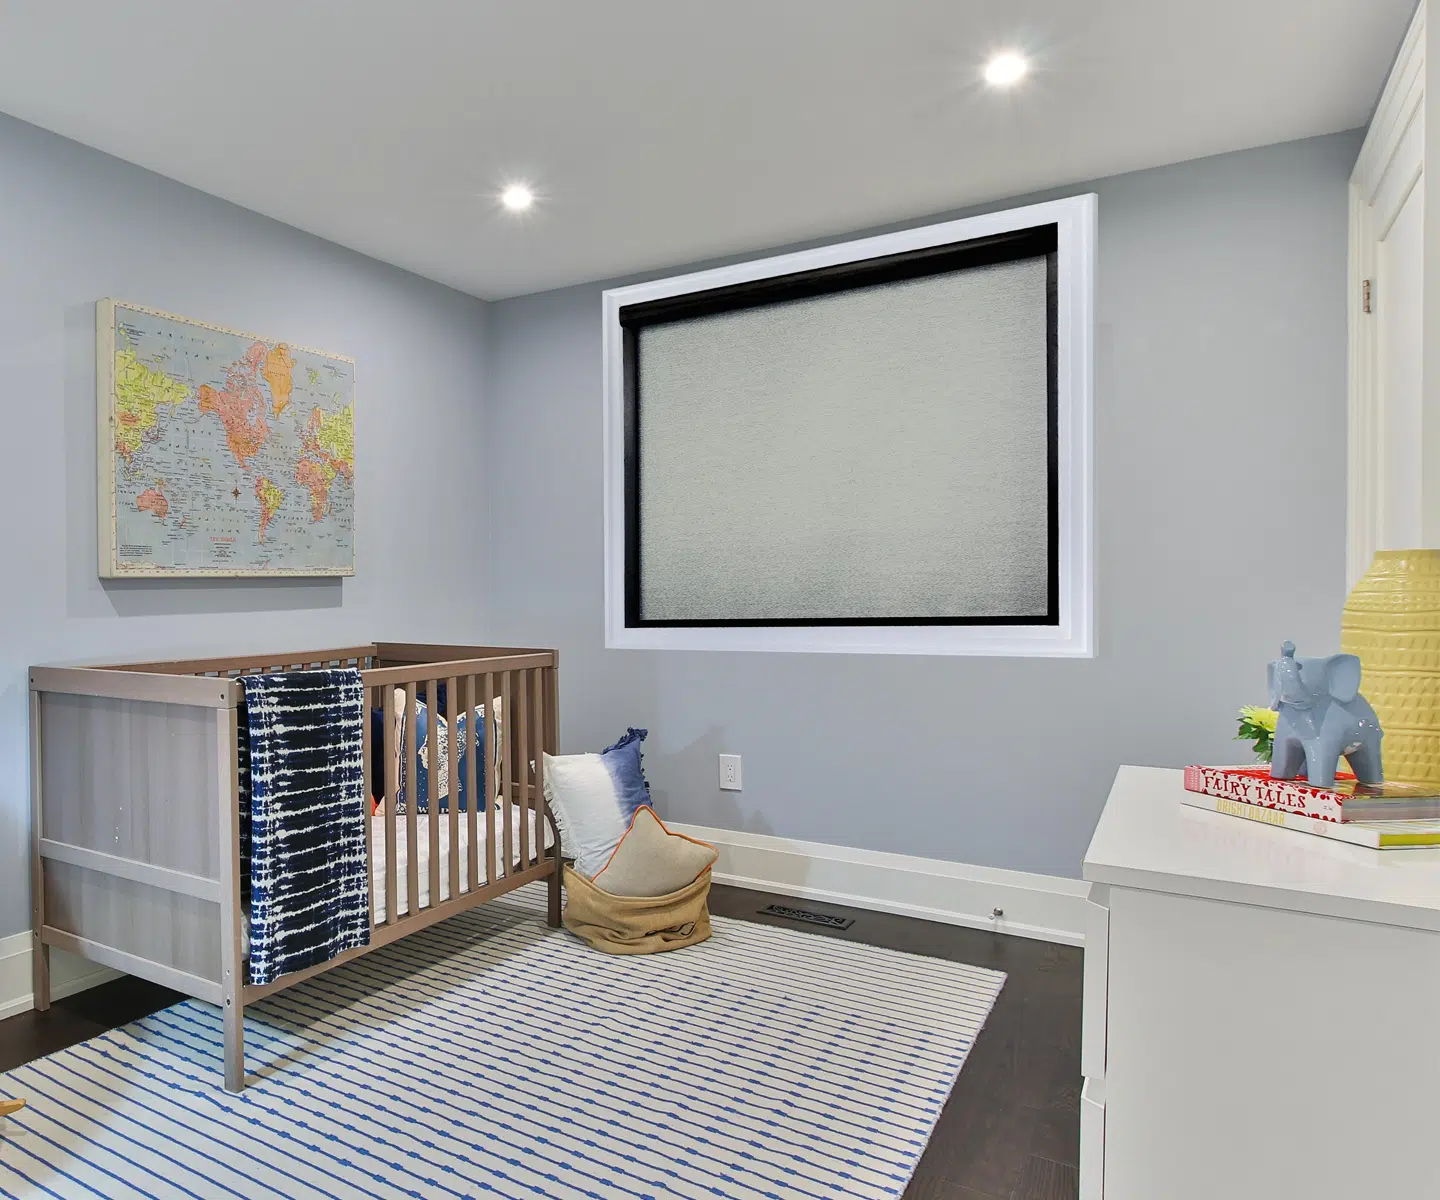 Norman Soluna ROller Shades in a room with crib.jpg